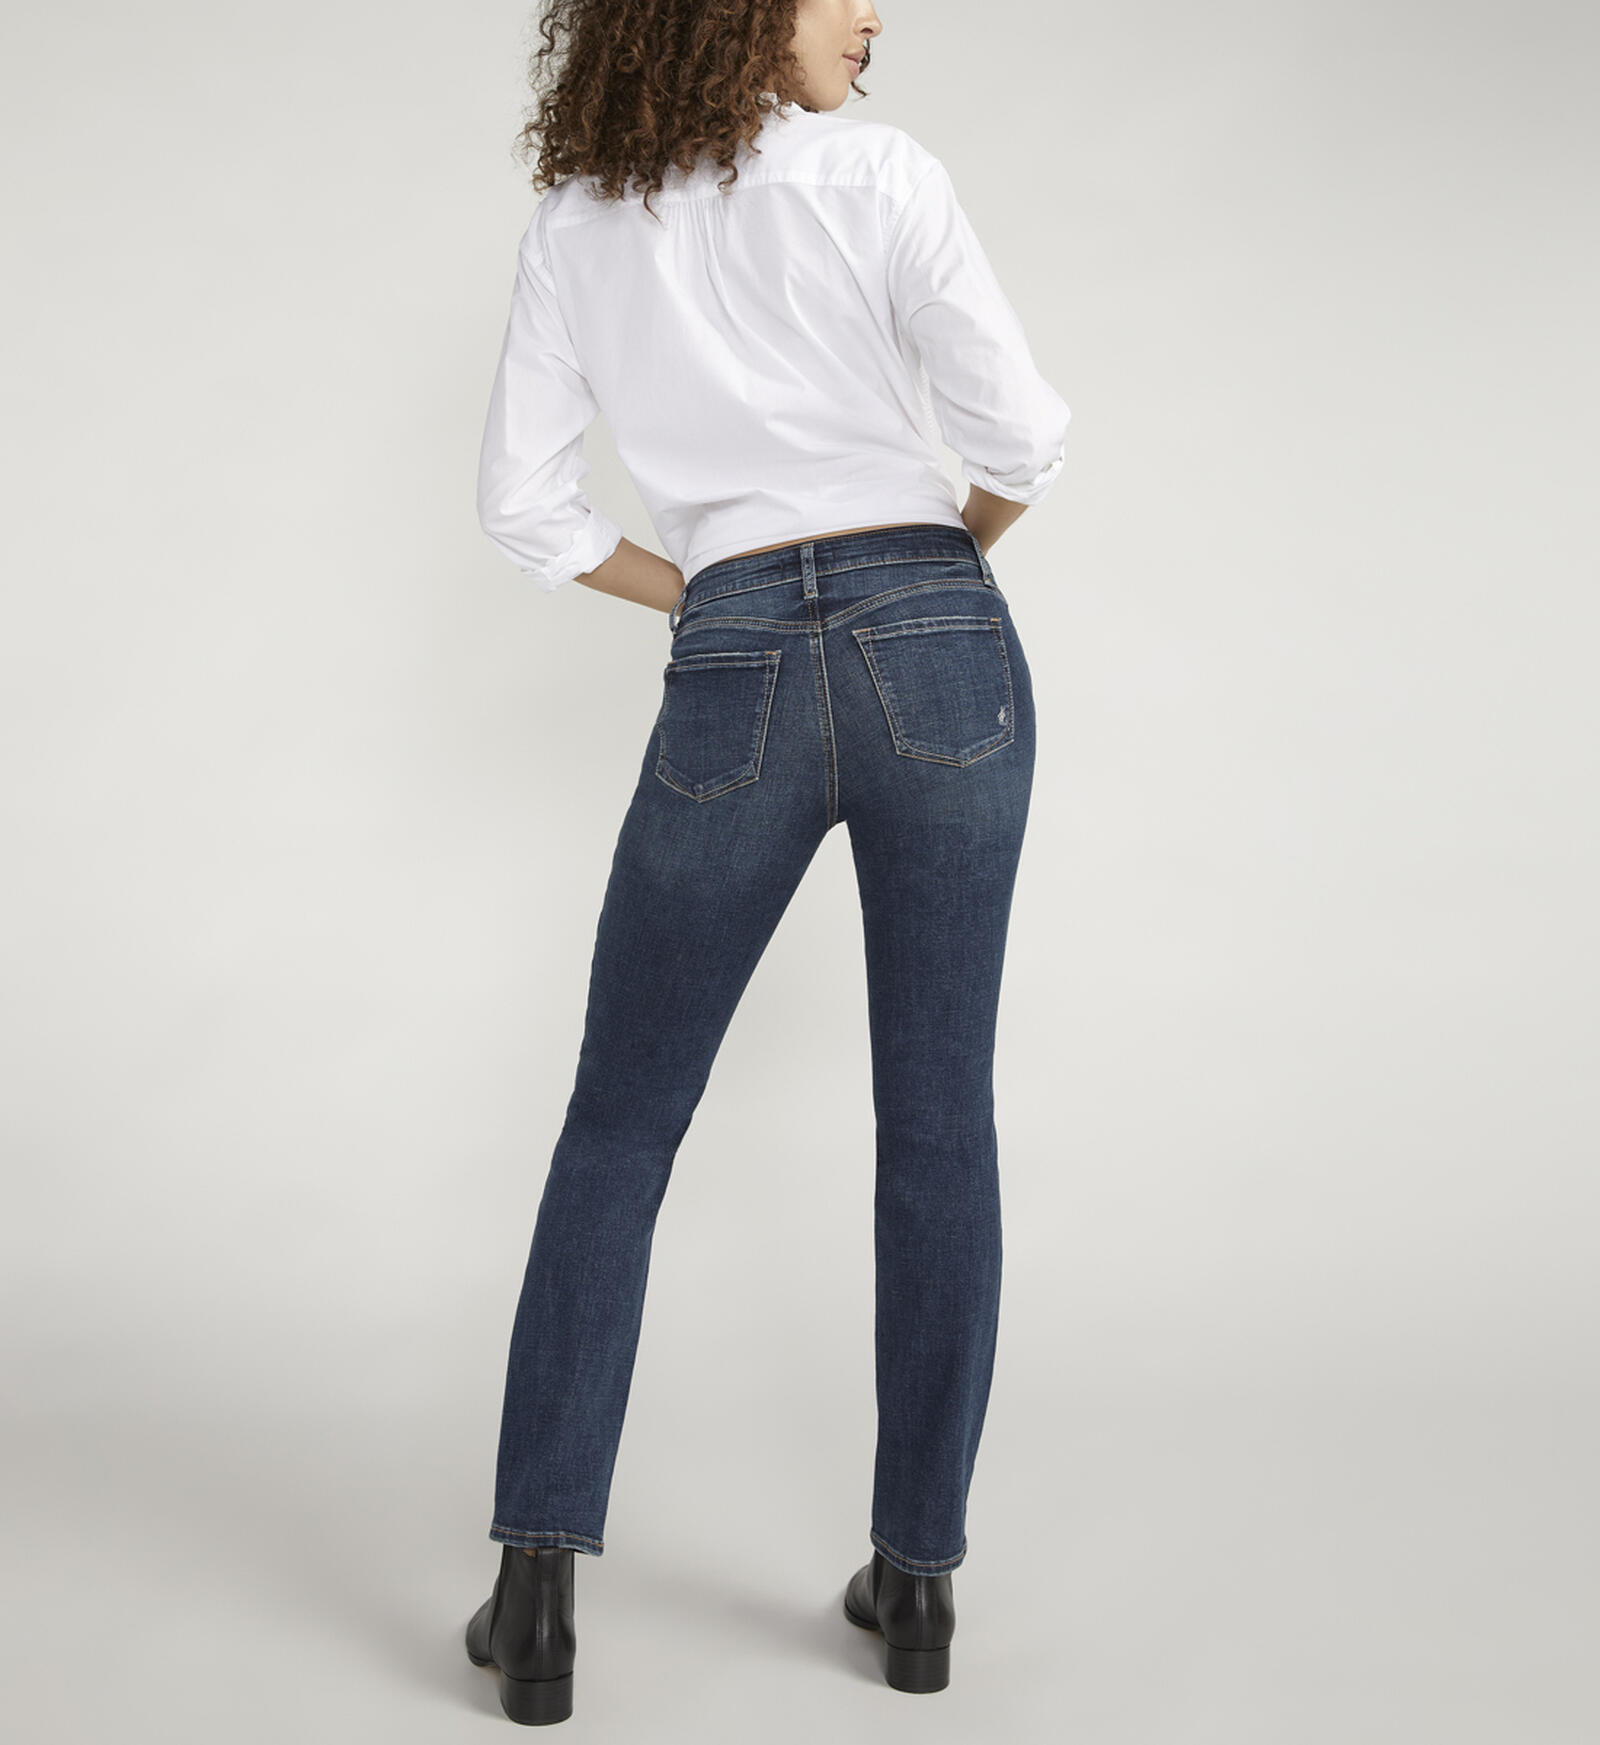 Buy Elyse Mid Rise Straight Leg Jeans for USD 78.00